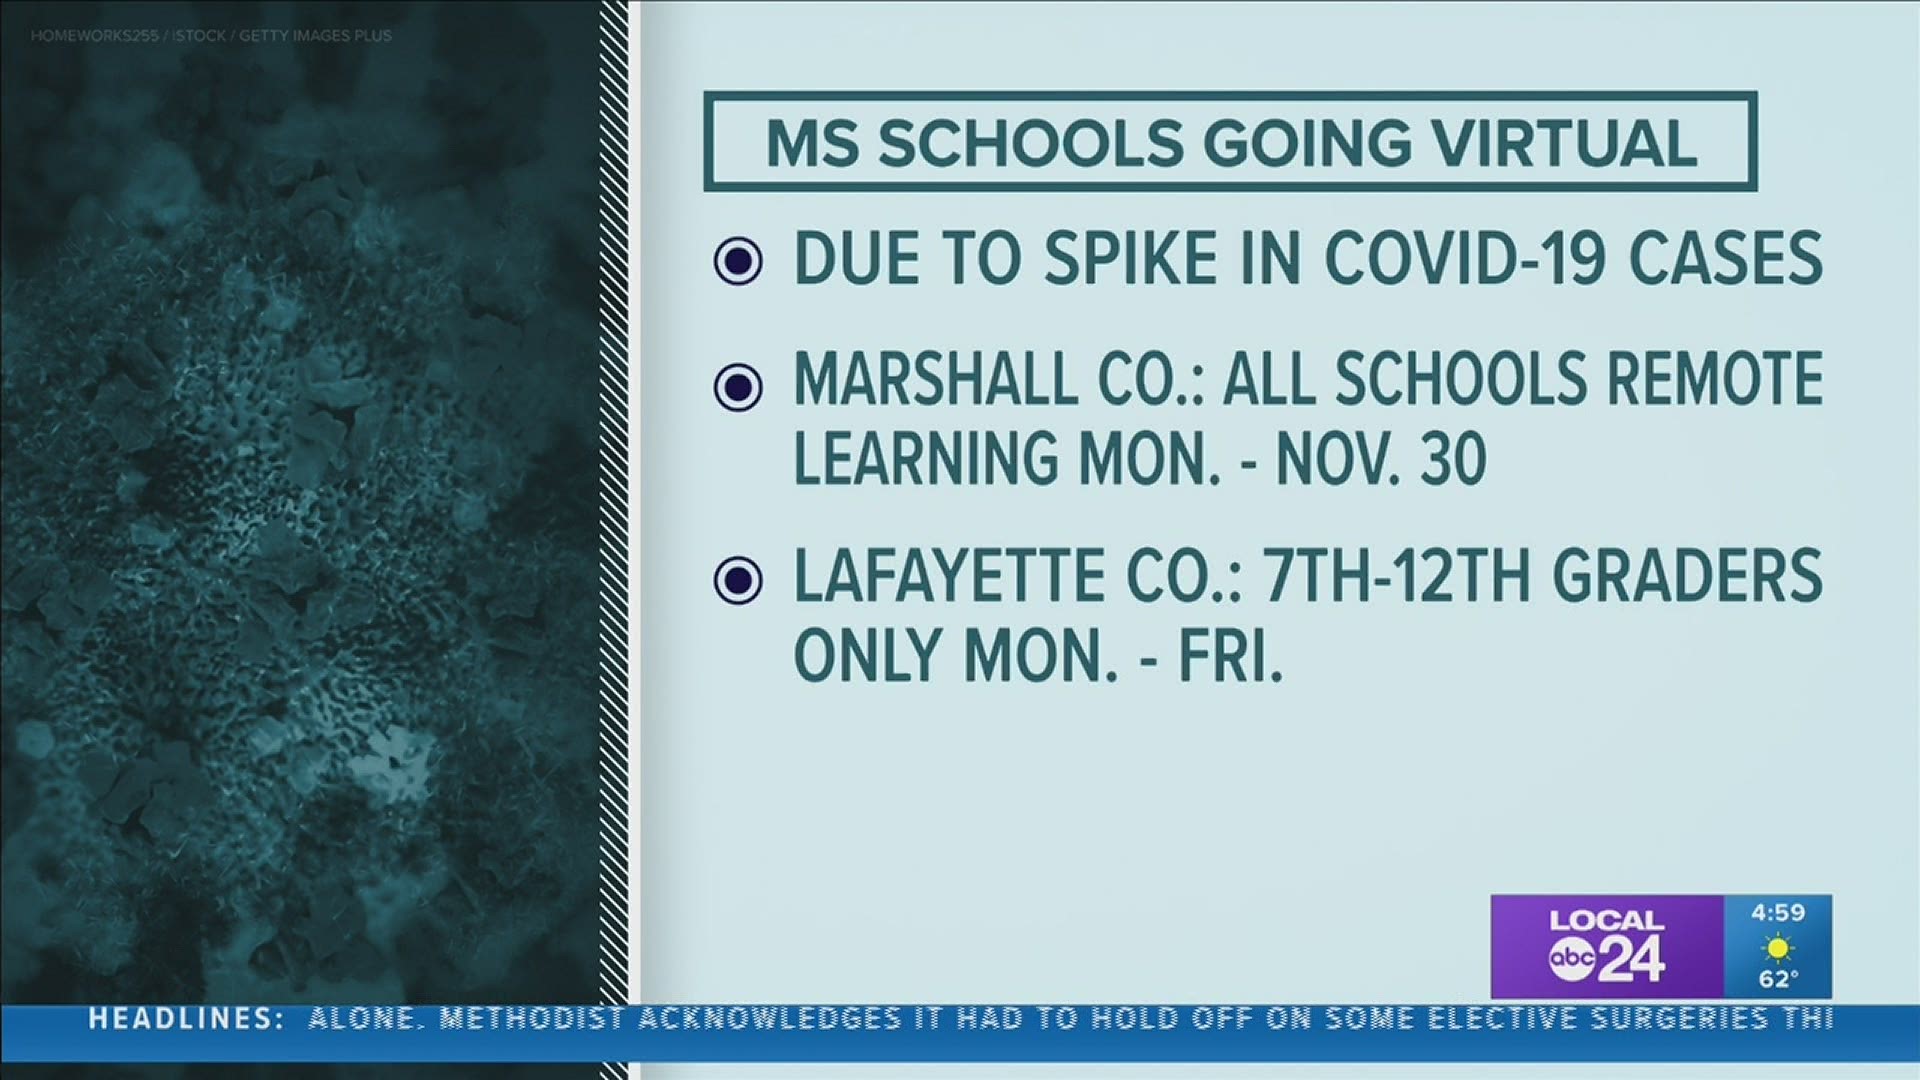 Marshall County Schools and Lafayette County Schools announced the move for some of the districts’ schools.